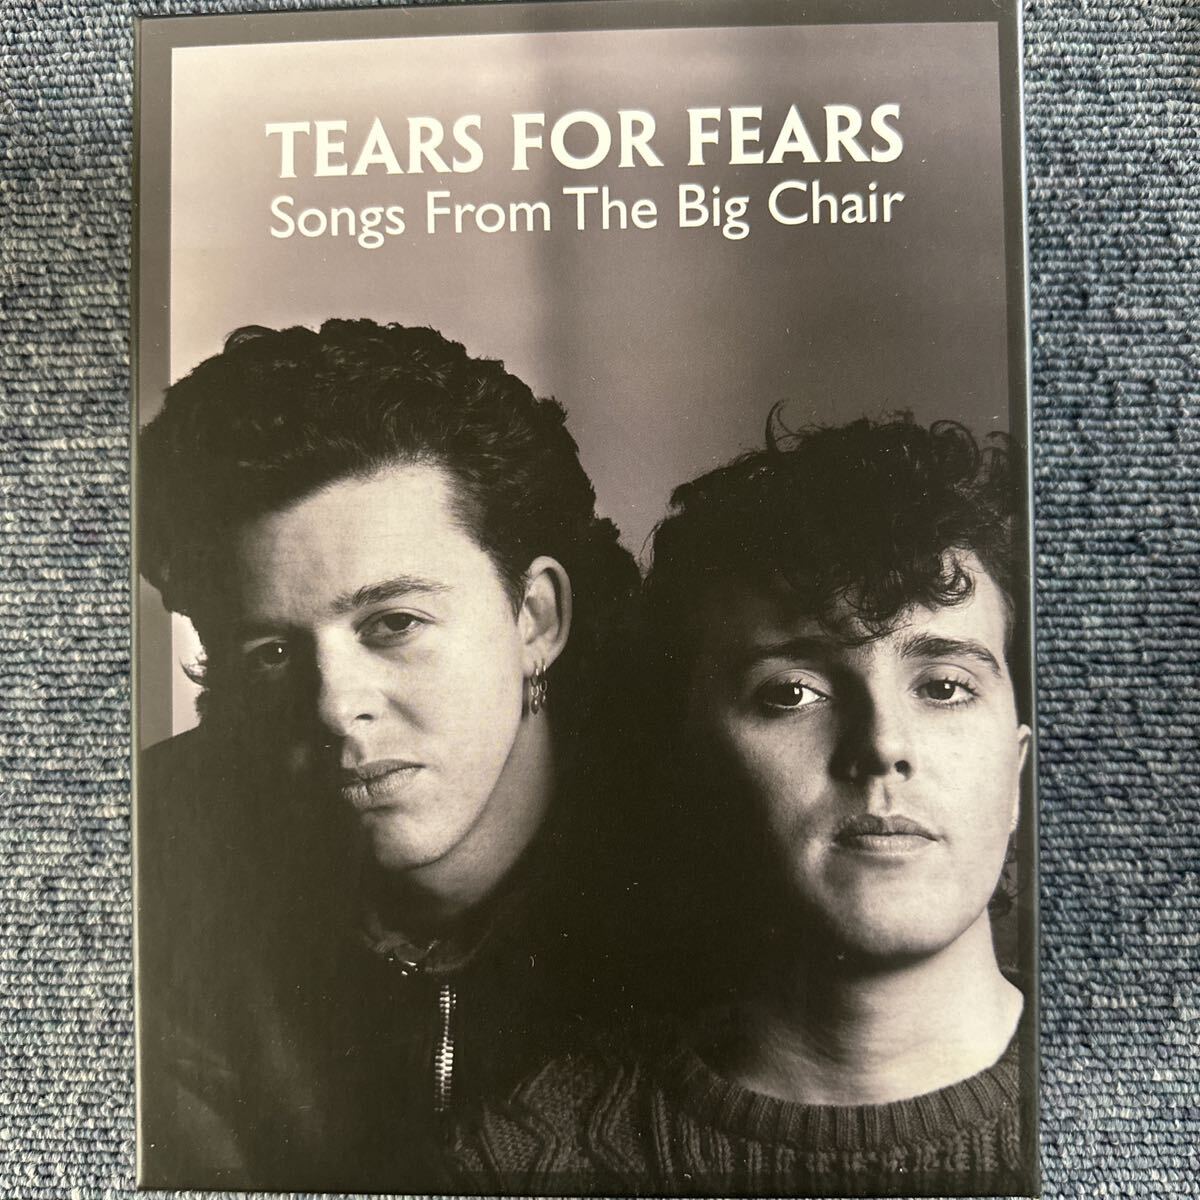 TEARS FOR FEARS SONGS FROM THE BIG CHAIR 6枚組　BOX 美品入手困難_画像1